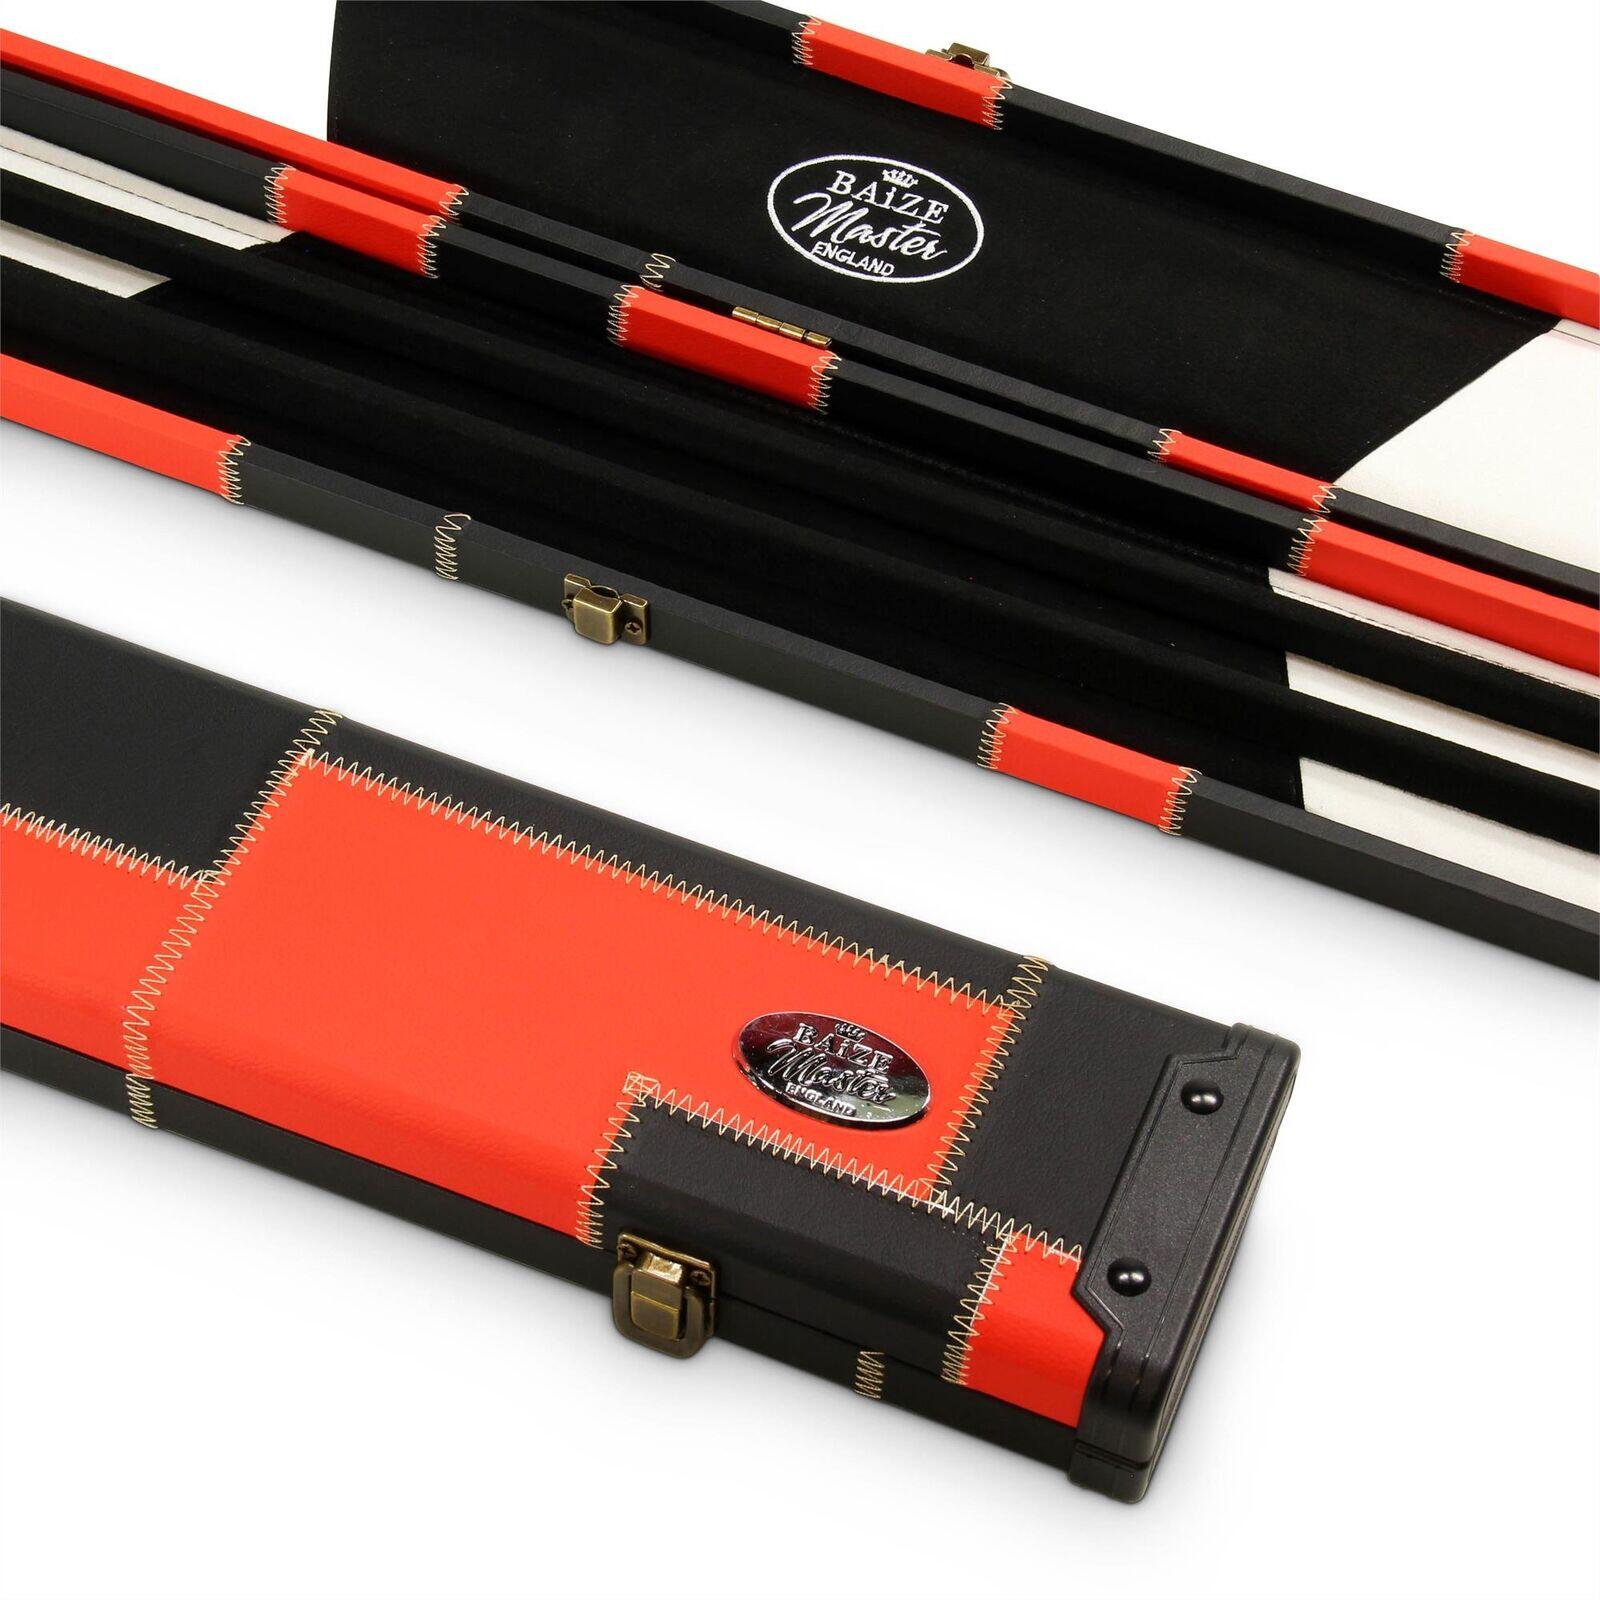 Baize Master 1pc WIDE RED & BLACK Patch Pool Snooker Cue Case Holds 3 Cues 2/6